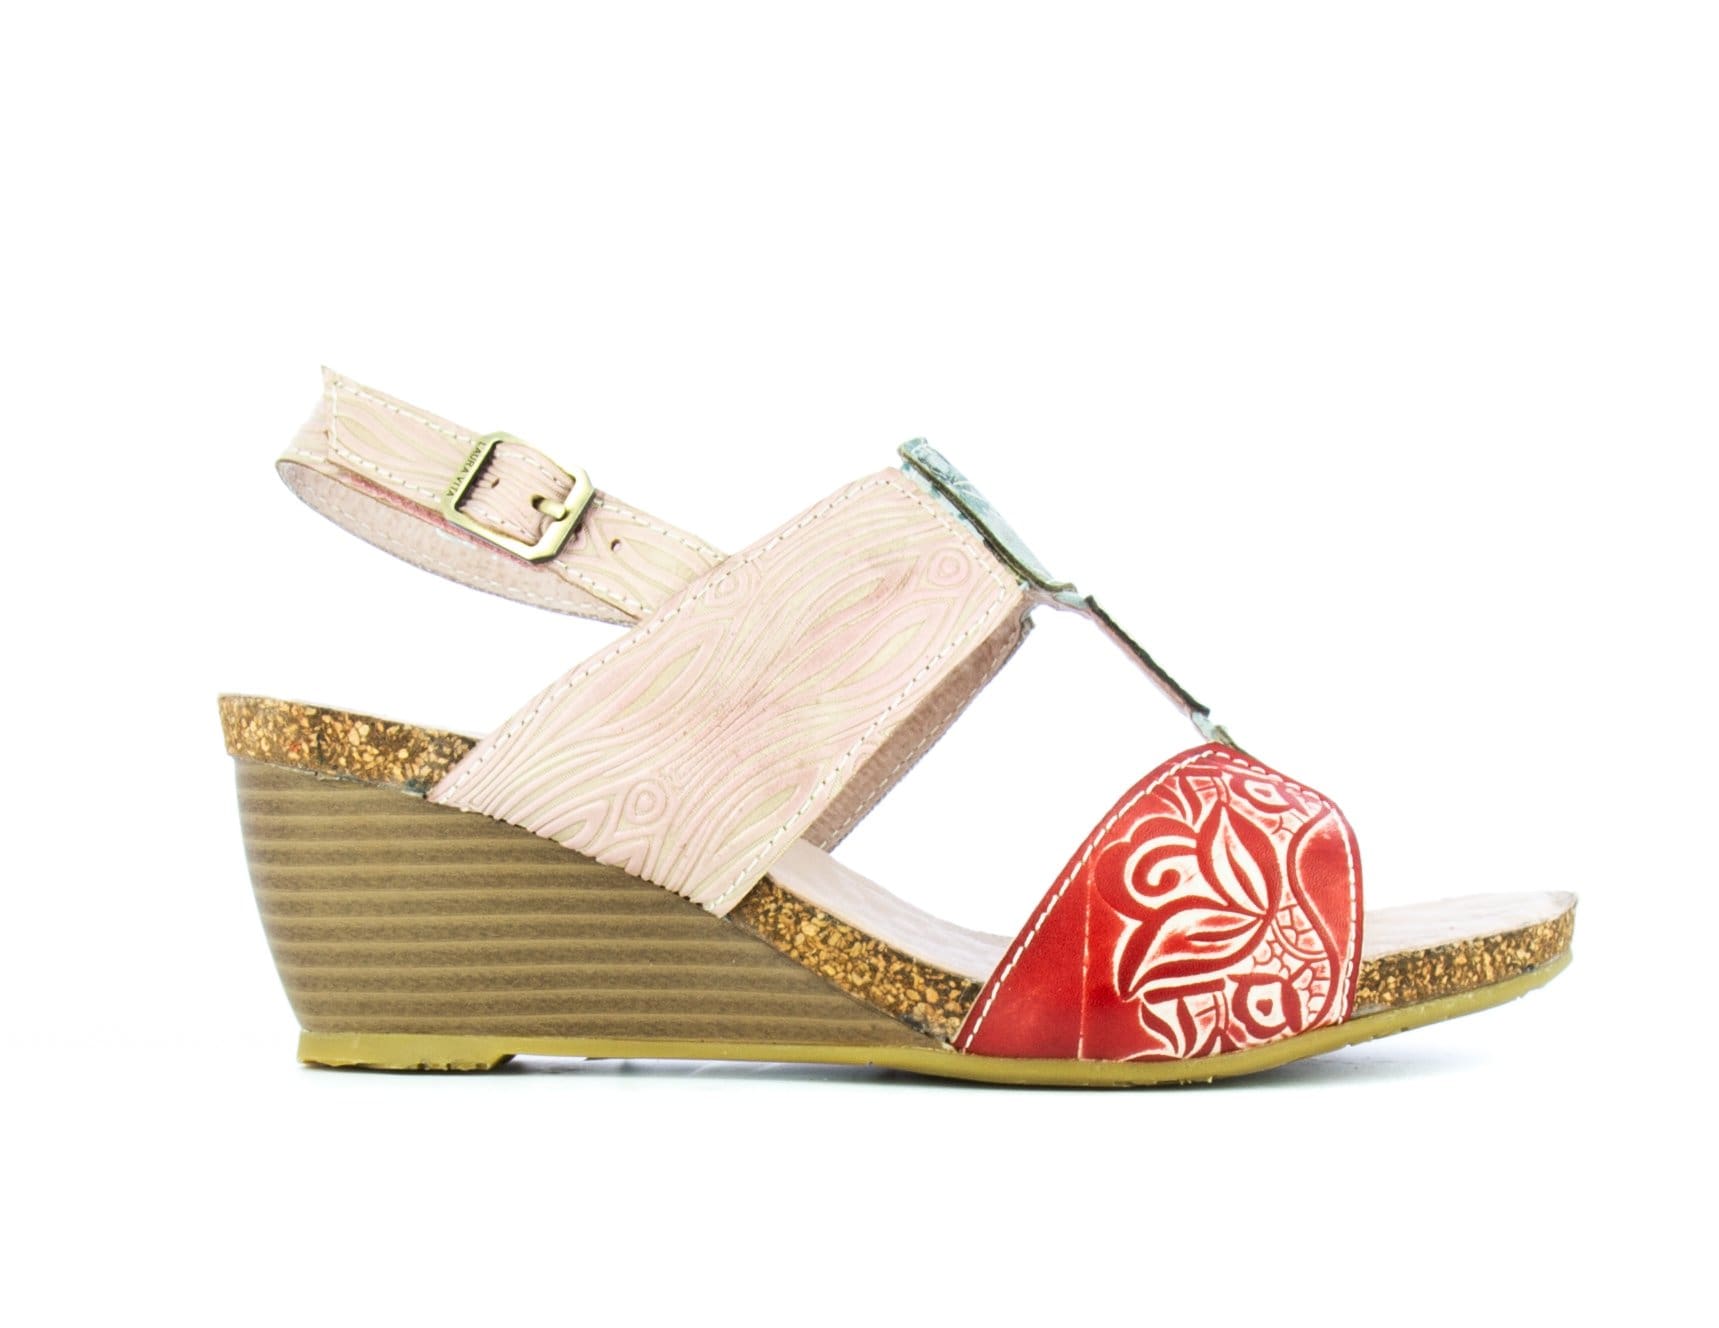 HACEOO 06 - 35 / RED - Sandal